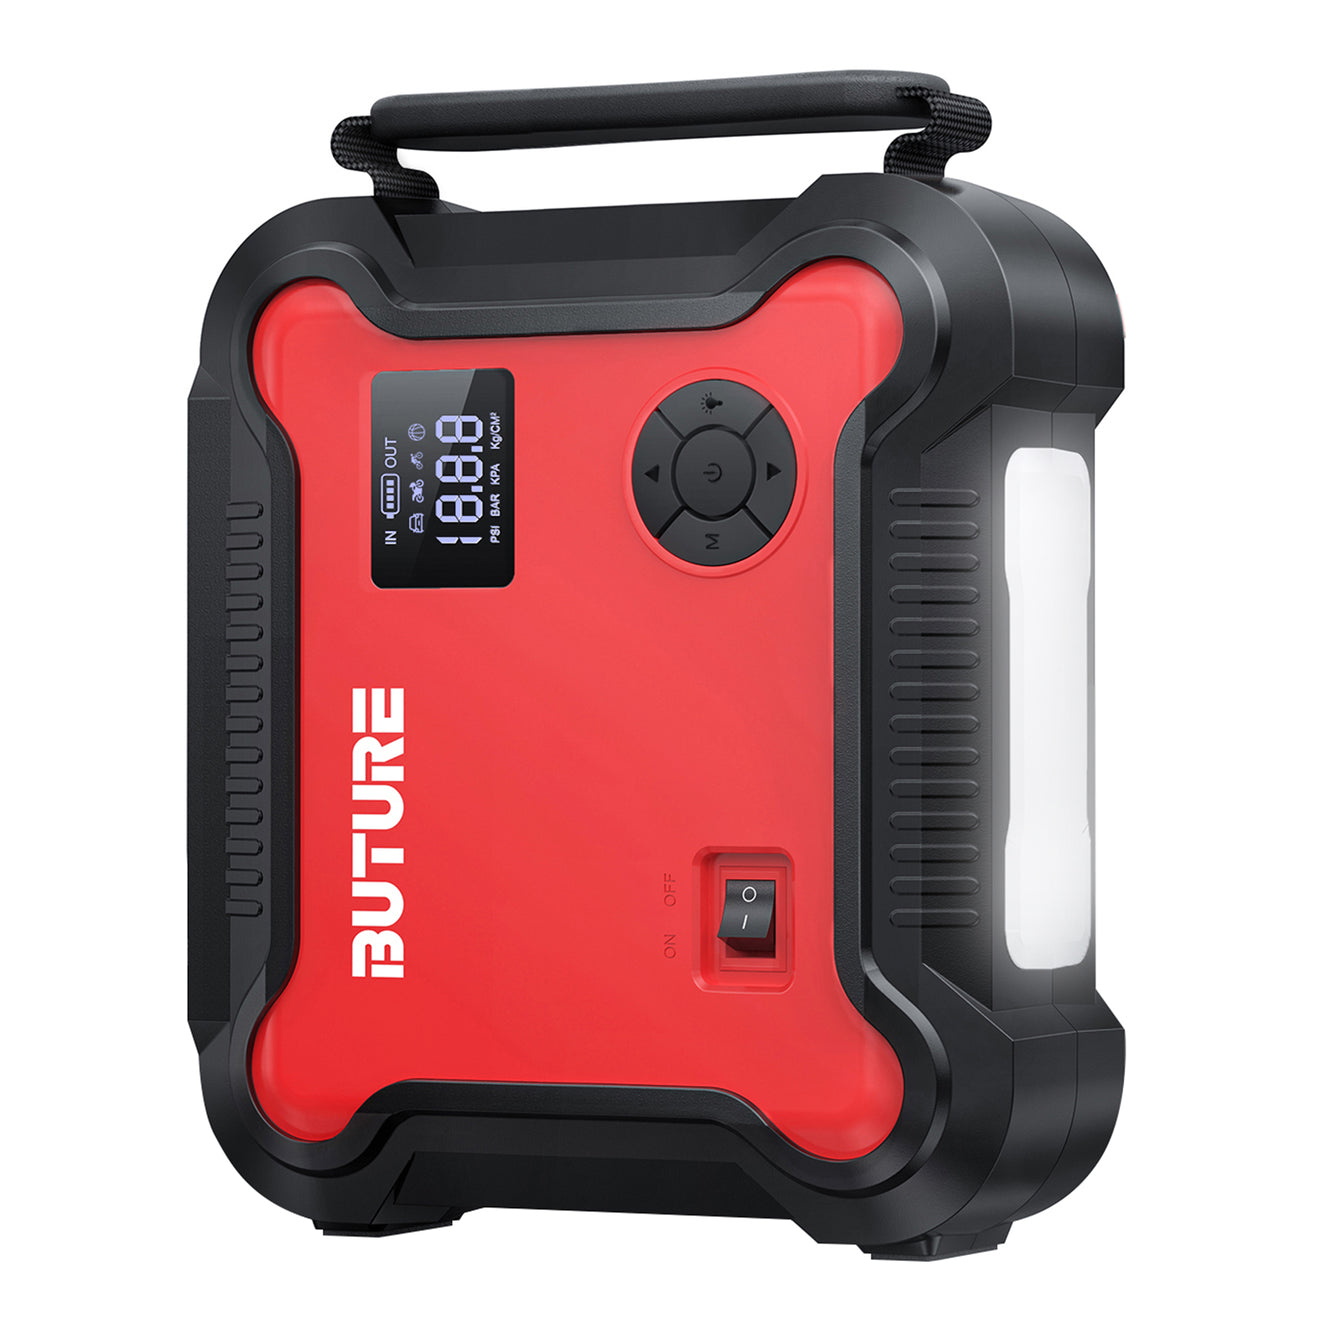  Portable Car Jump Starter with Air Compressor, BUTURE 150PSI  2500A 23800mAh Battery Booster Pack (All Gas/8.0L Diesel) Digital Tire  Inflator : Automotive